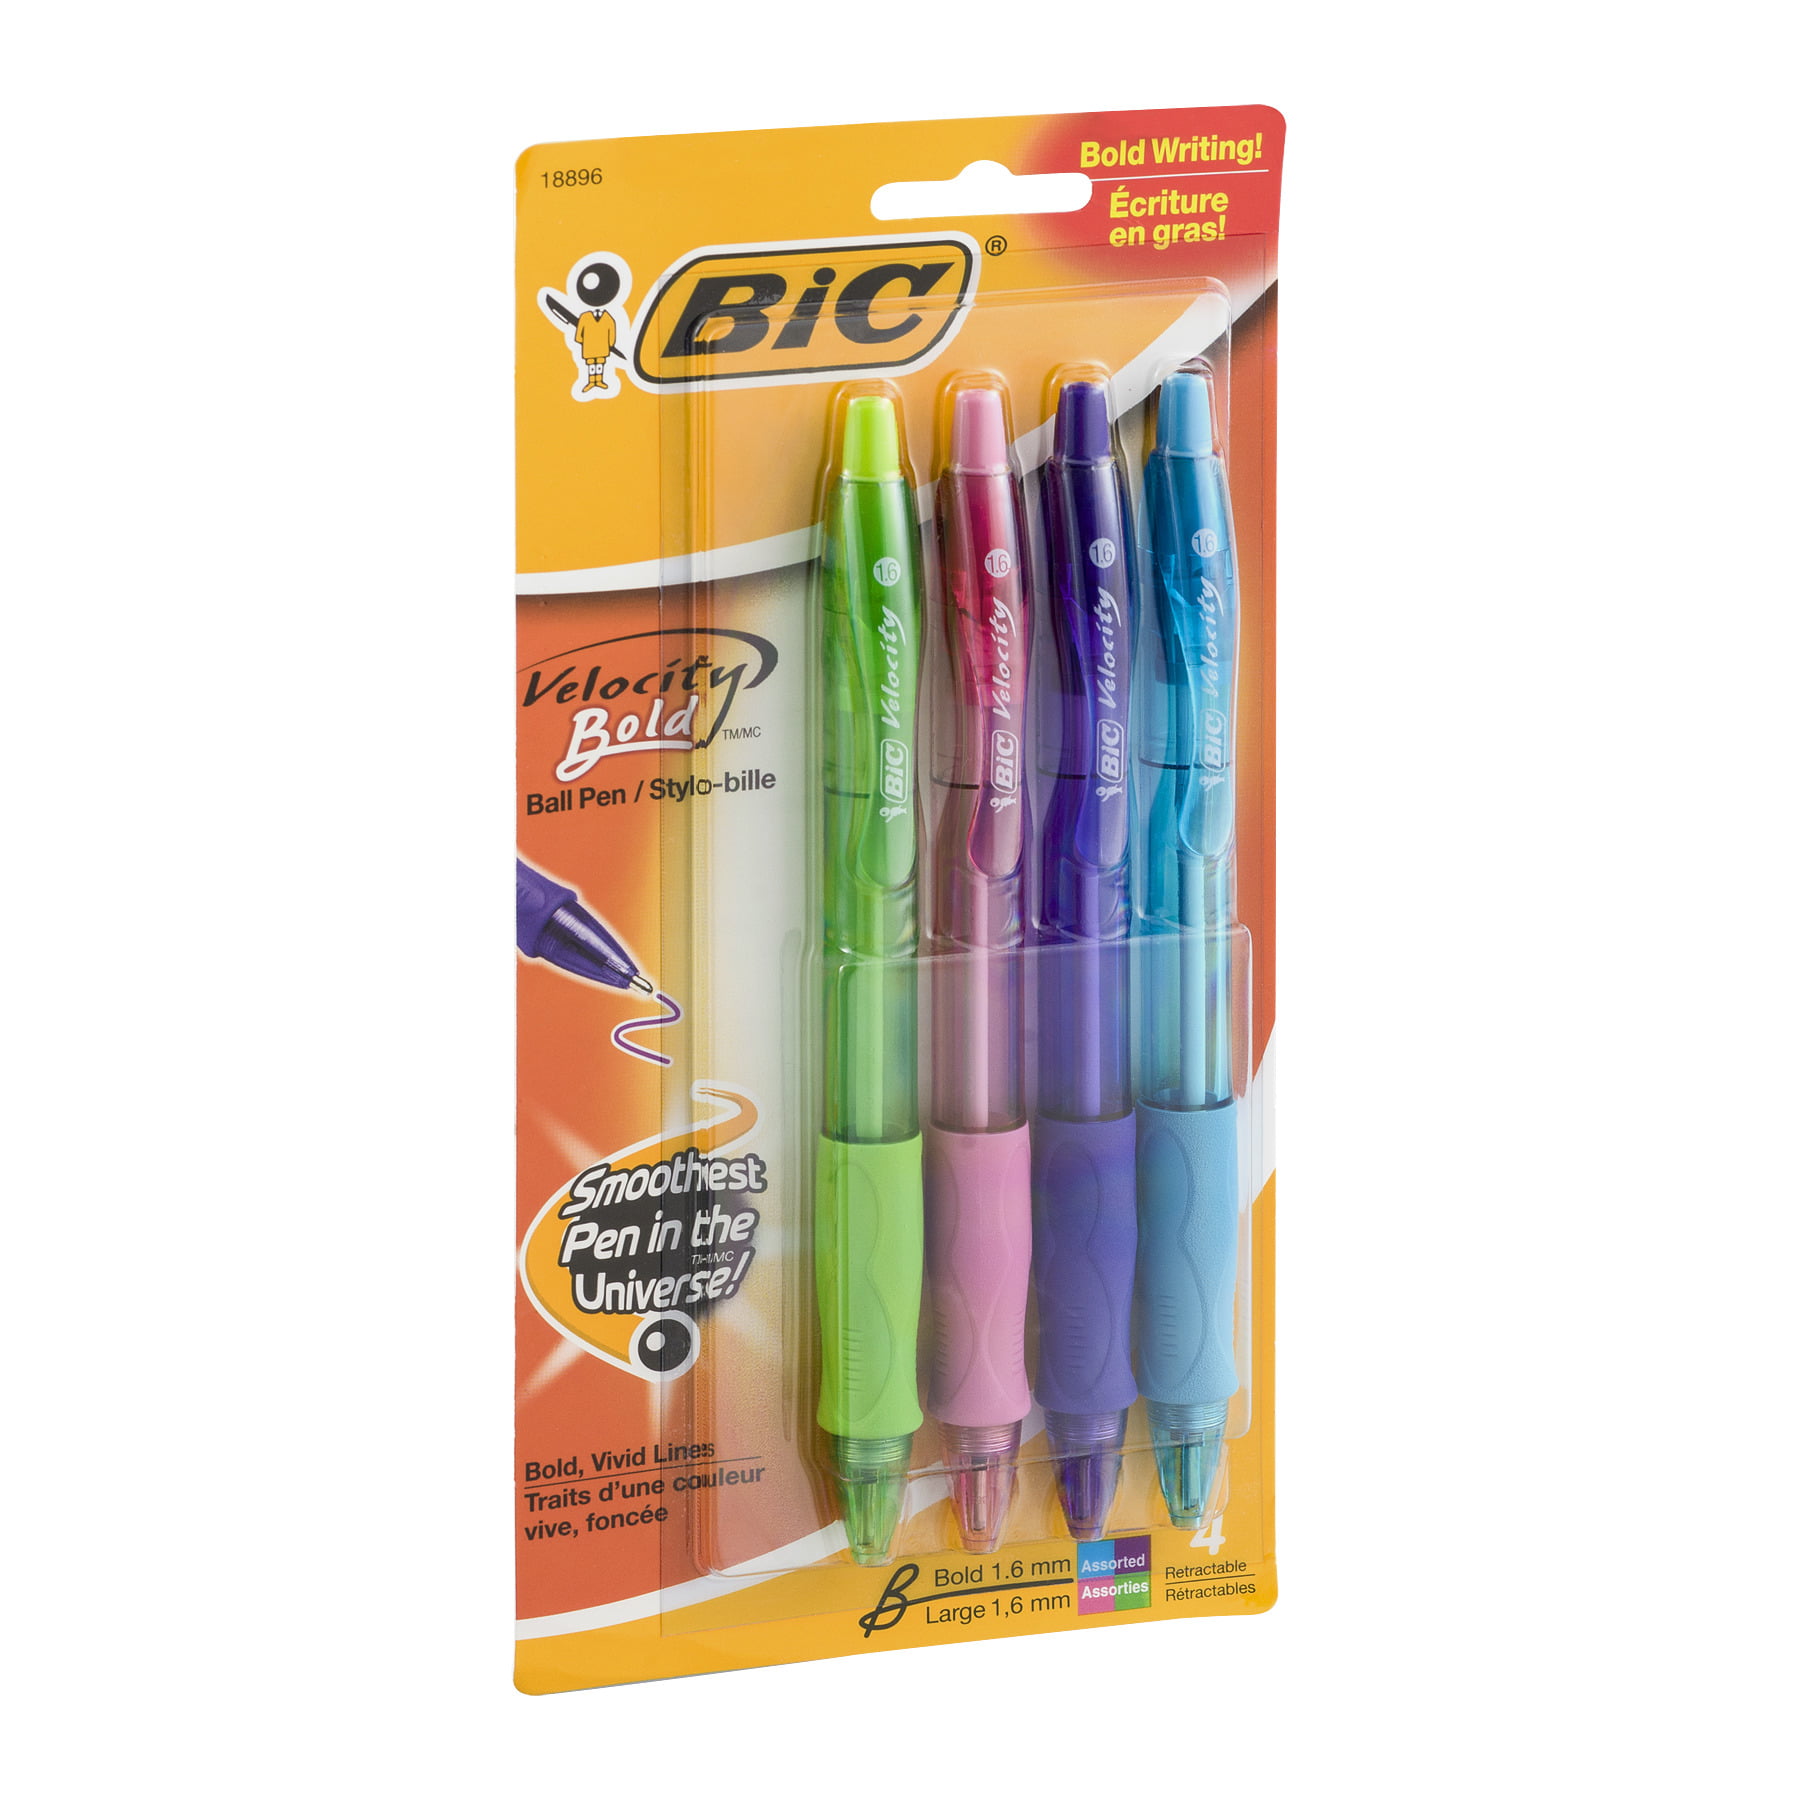  BICVLGBAP41  BIC Velocity Bold Ballpoint Pens, Retractable, 1.6  mm, Assorted, 4 Pack